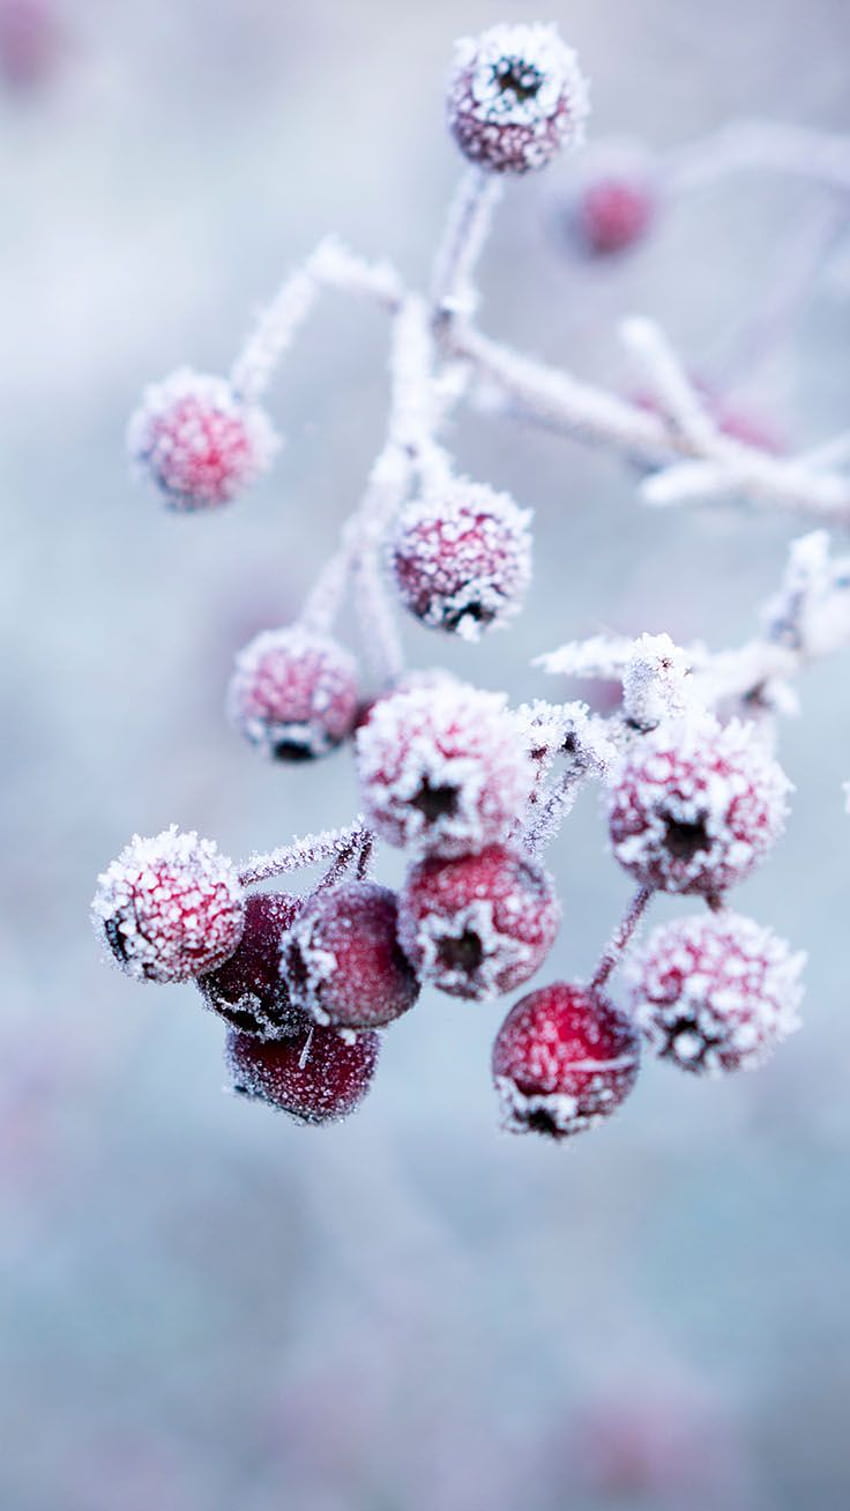 Winter Flower Pictures  Download Free Images on Unsplash